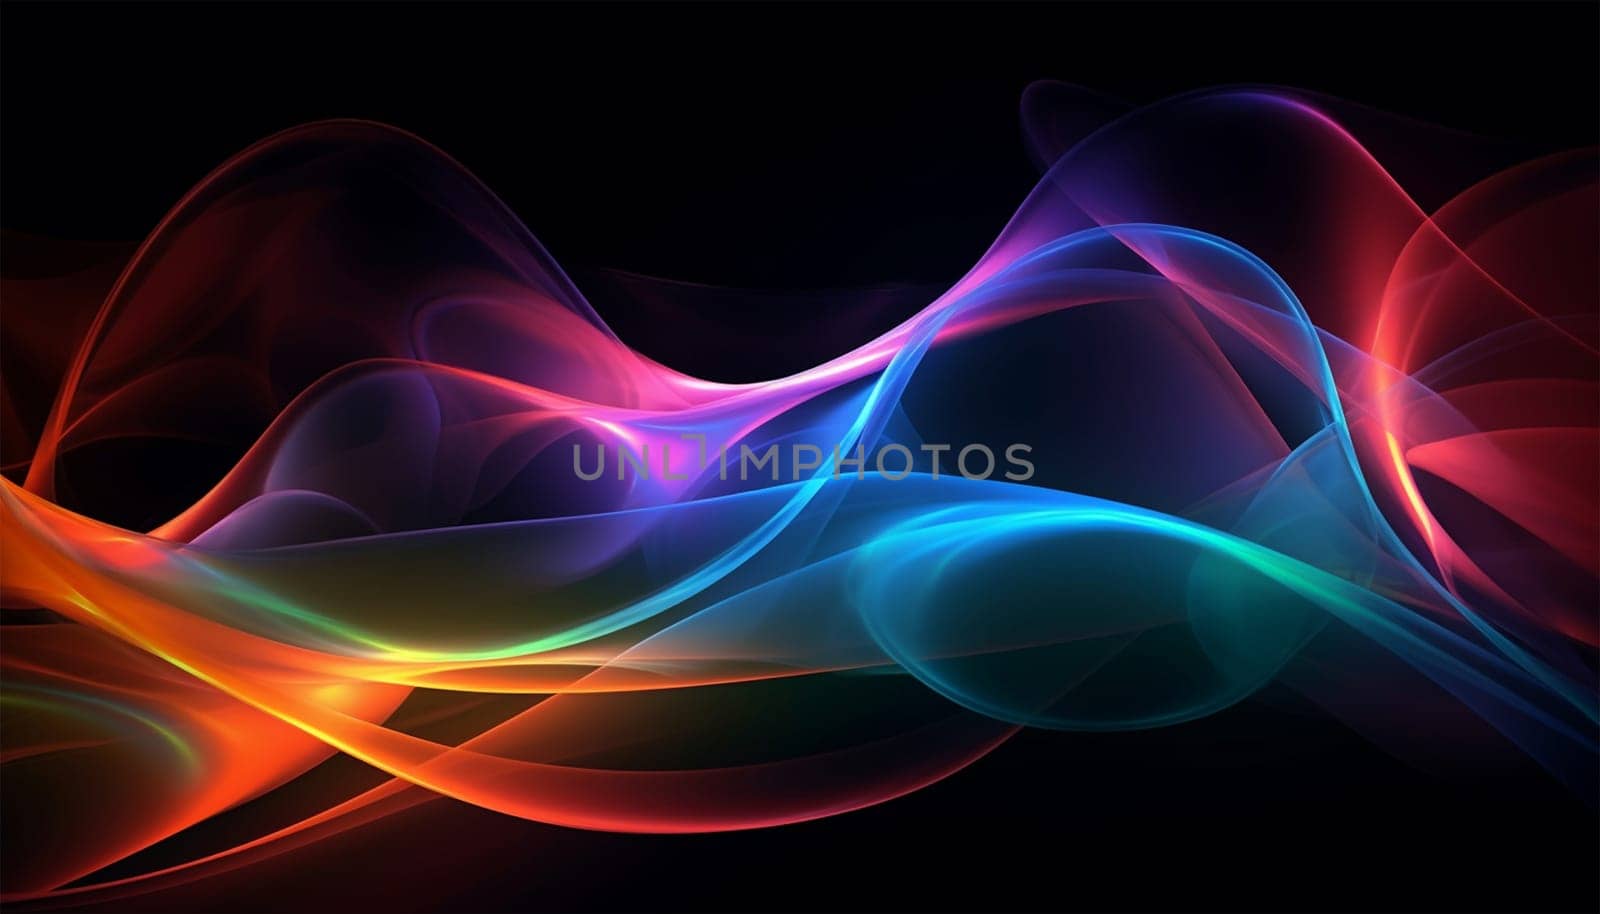 Abstract 3d render. Multicolored waves. Holographic shape in motion. Iridescent gradient digital art for banner background, wallpaper. Transparent glossy design element flying in seascape. Black background Various neon colors modern